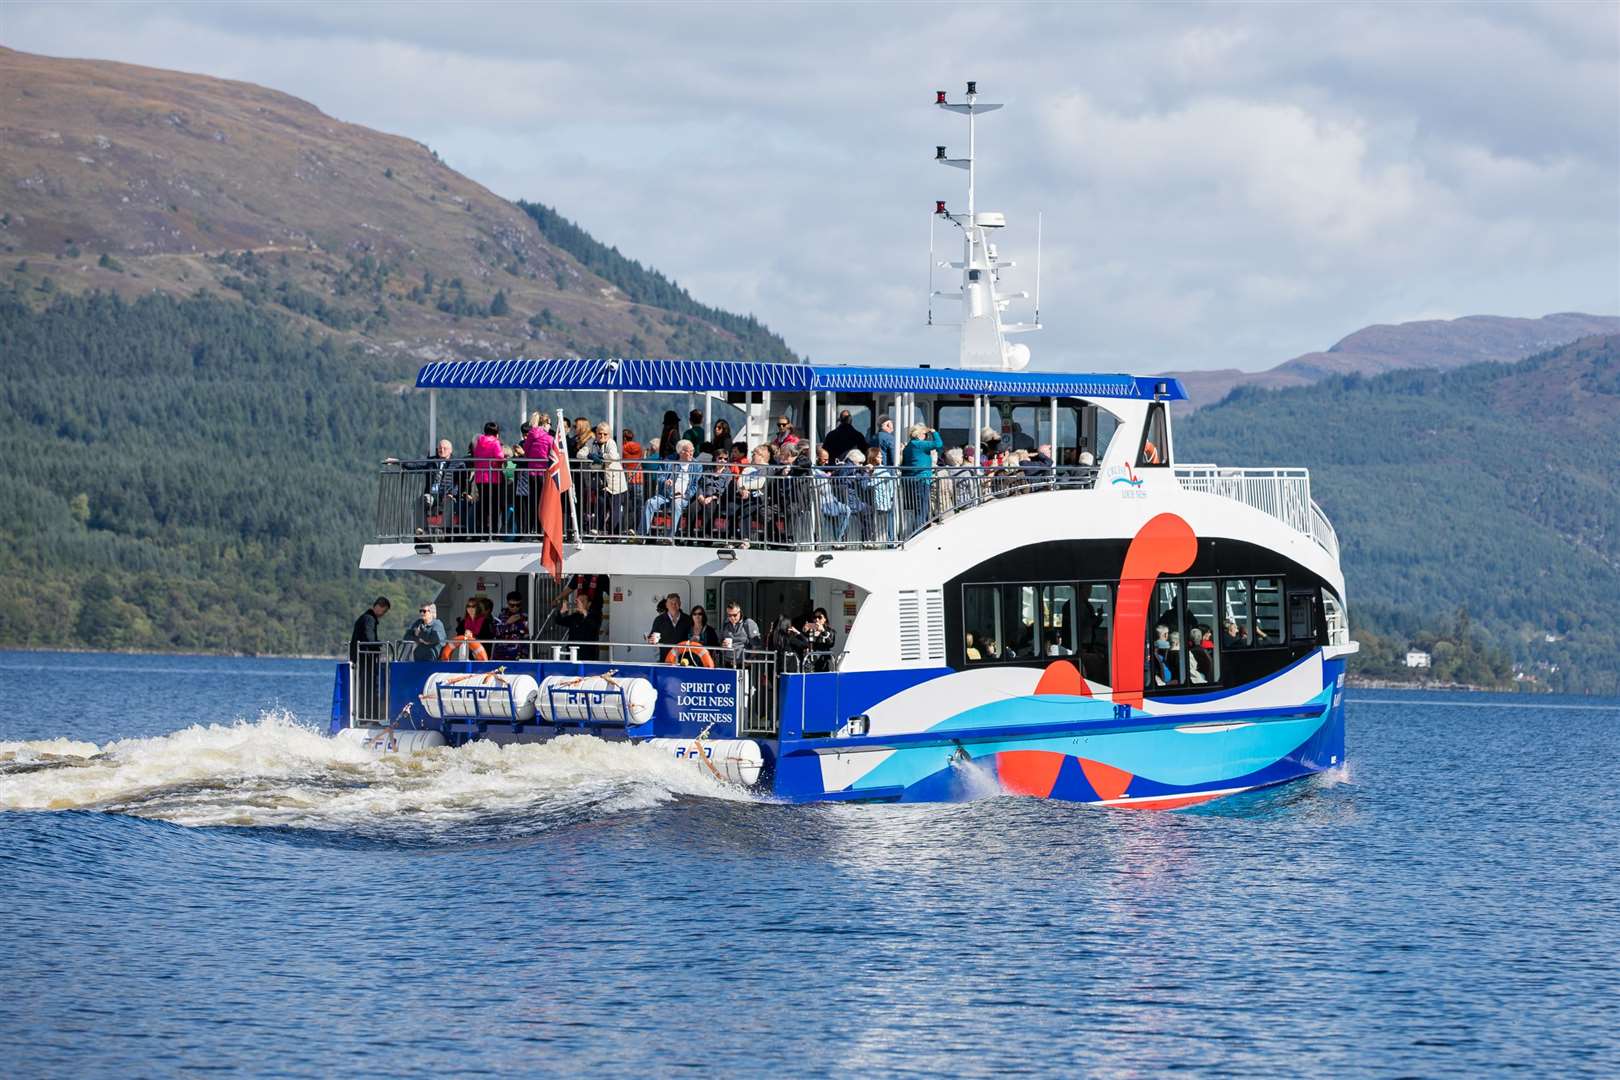 Flagship vessel The Spirit of Loch Ness can accommodate 210 passengers.